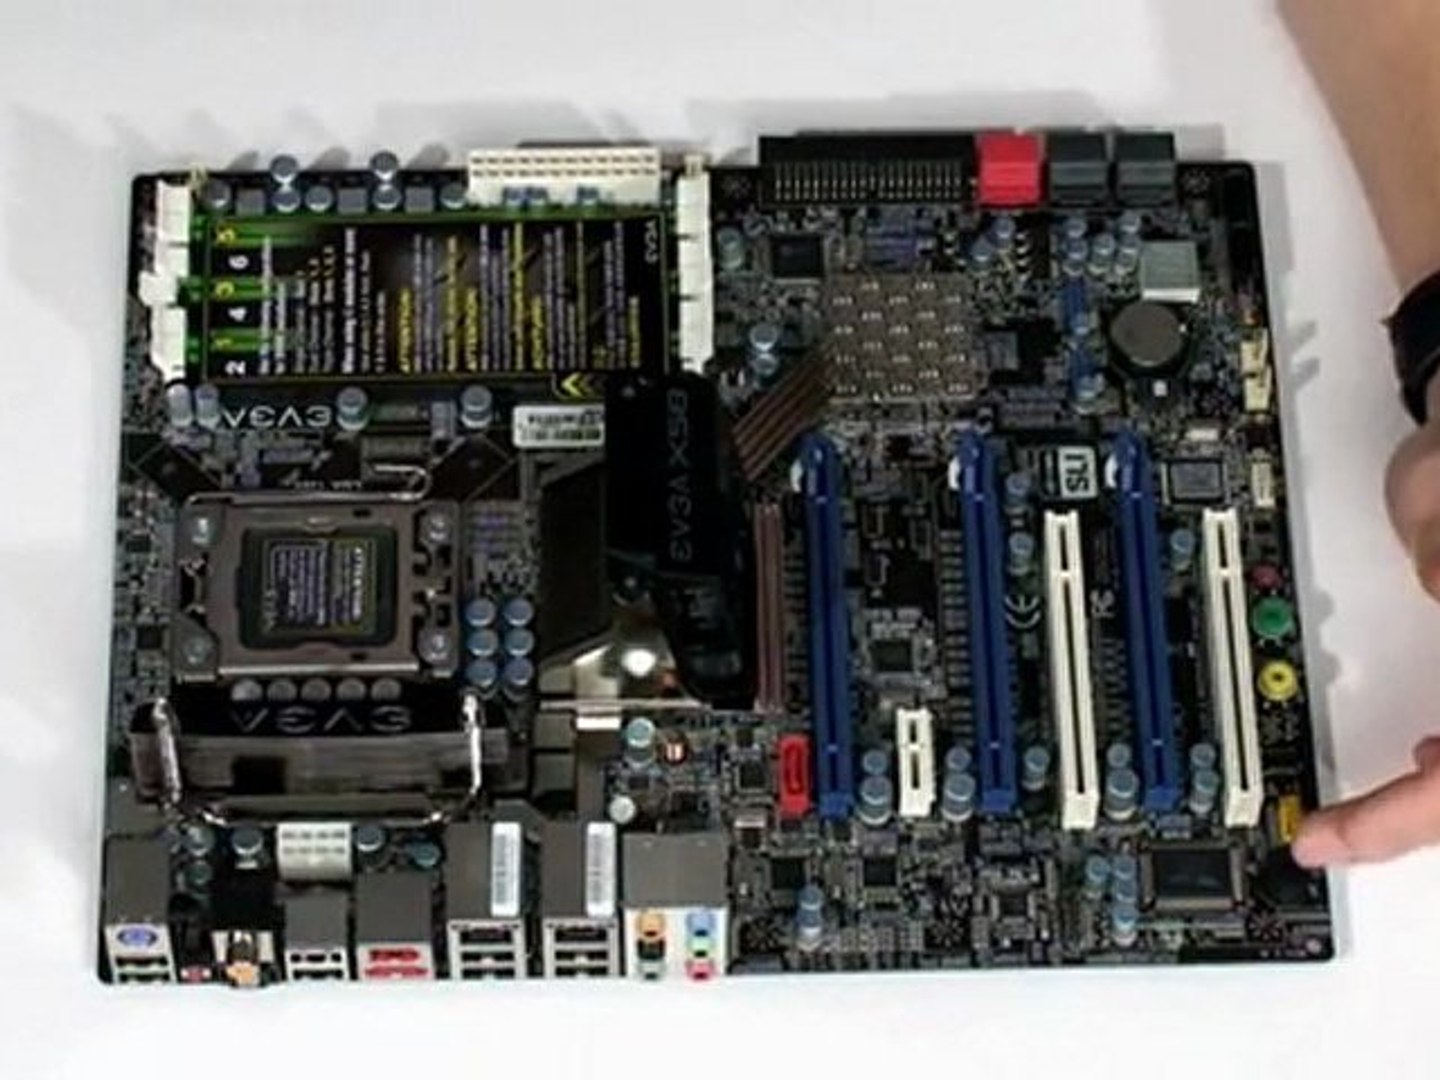 eVGA X58 Motherboard Overview (Linus Tech Tips #3)